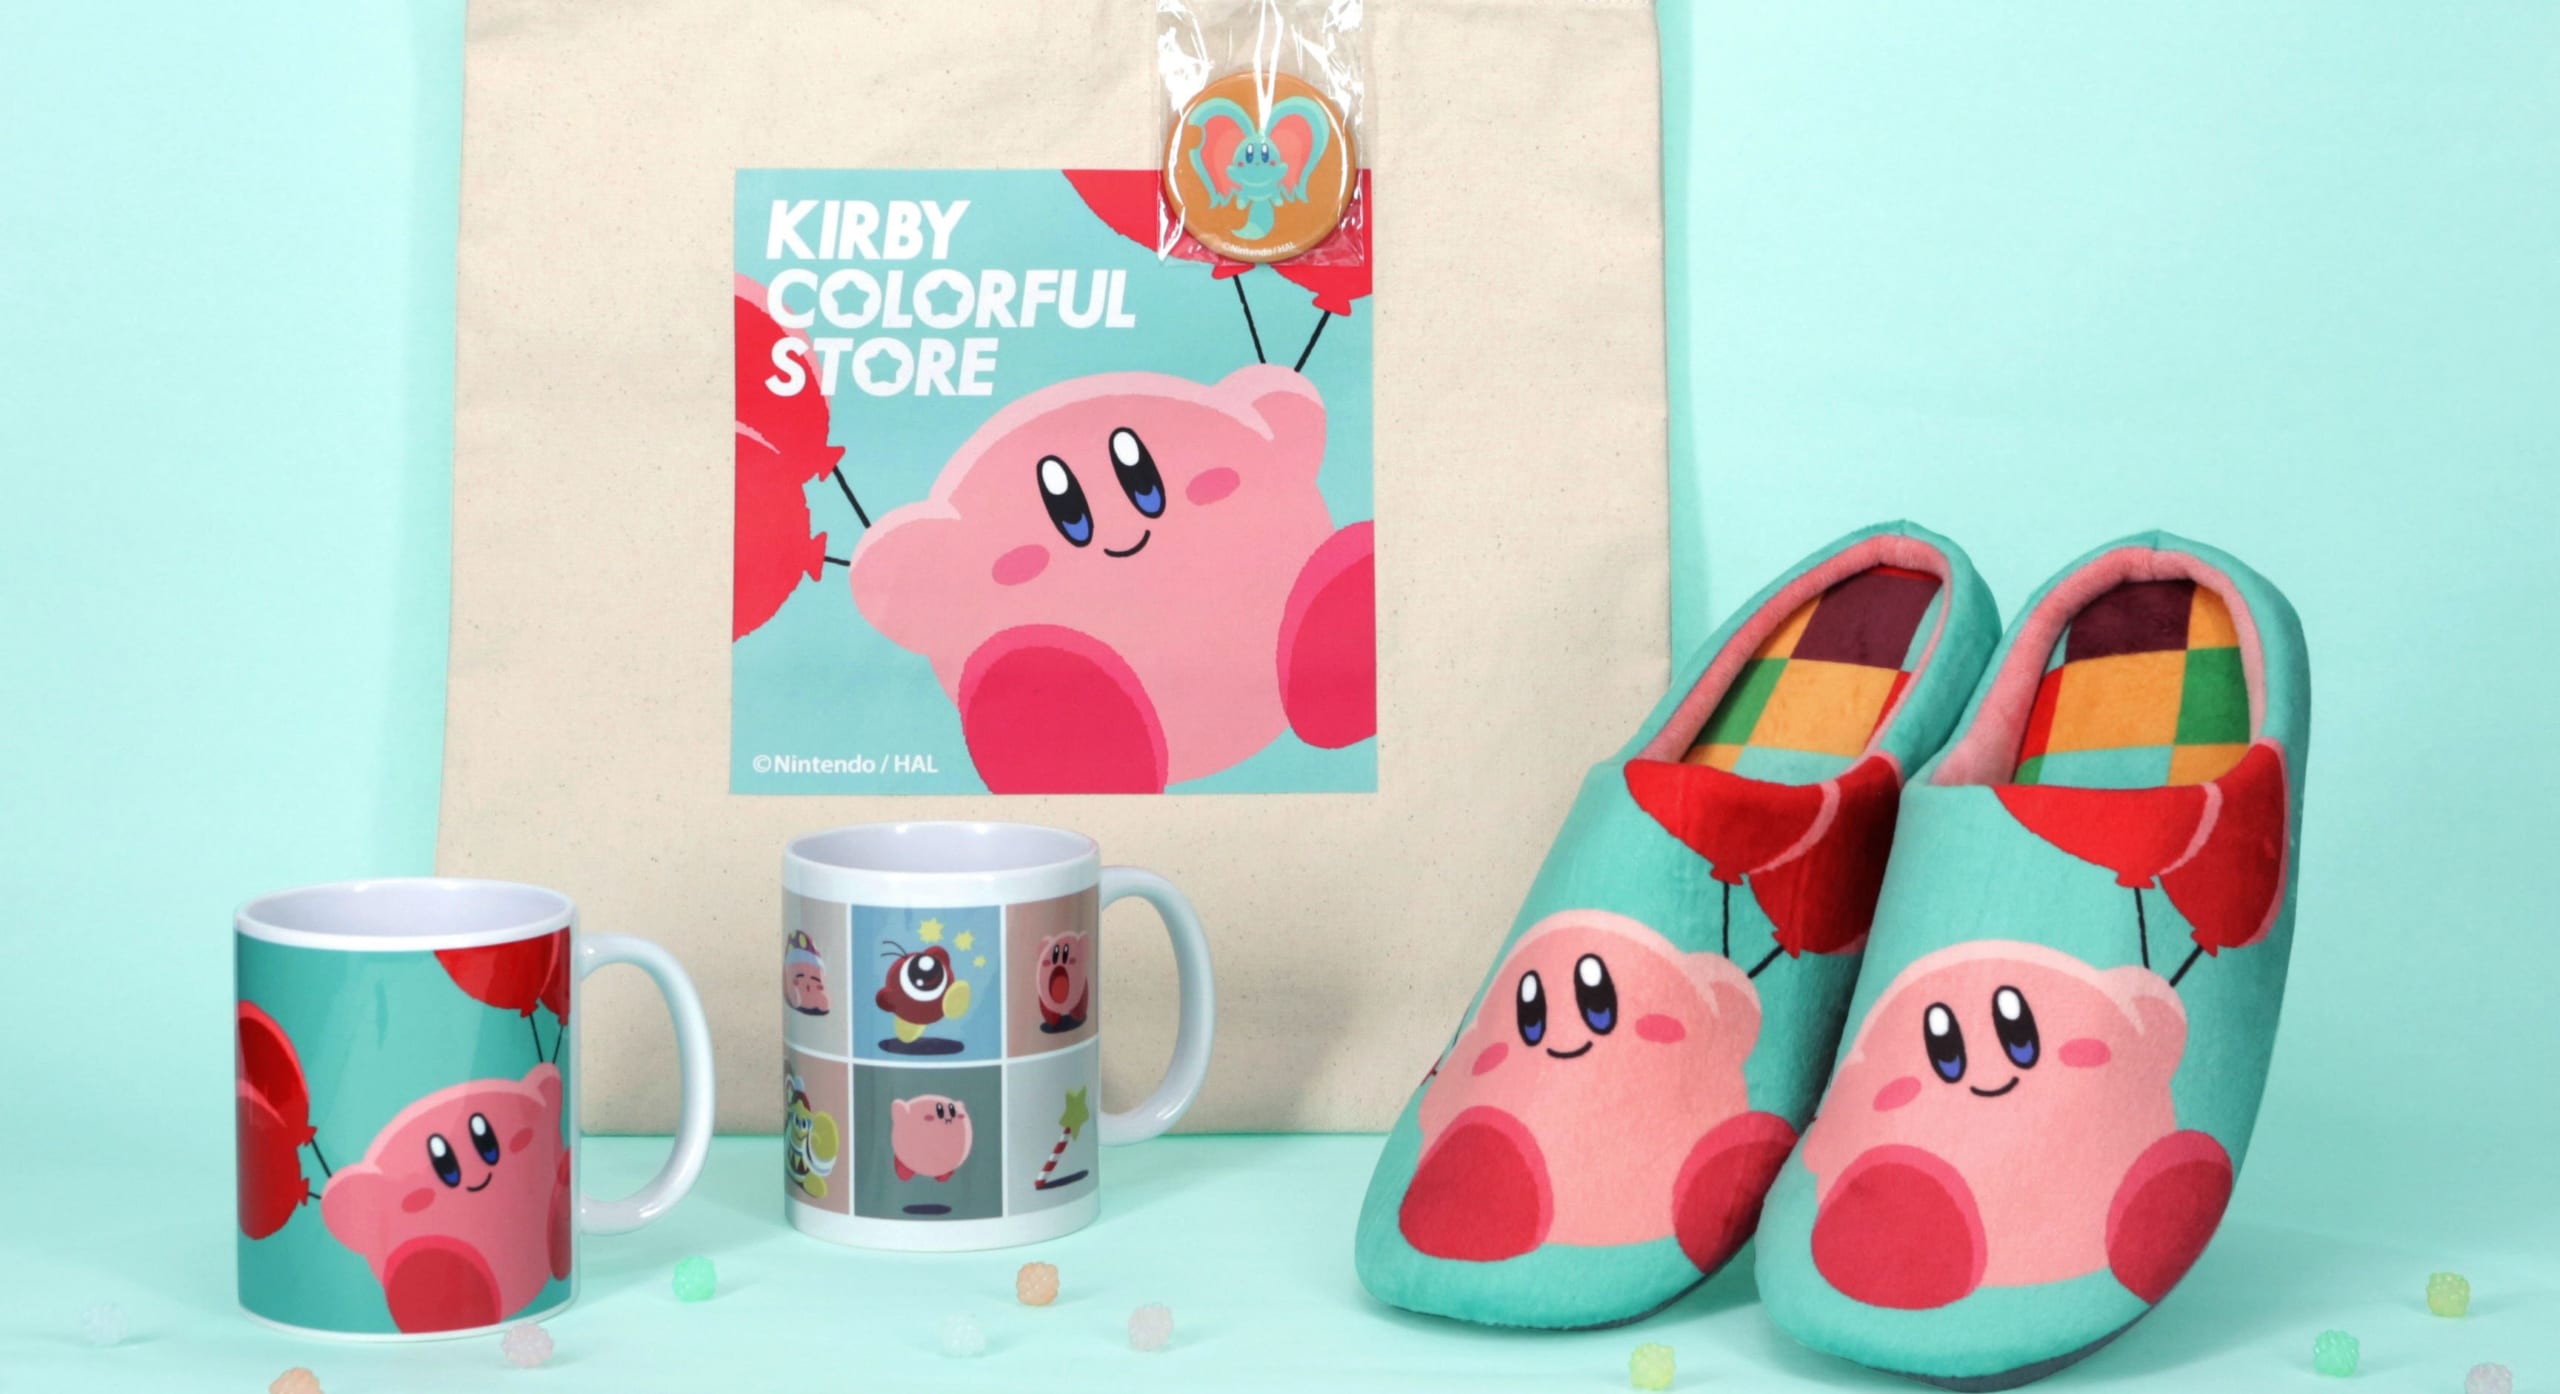 「KIRBY COLORFUL STORE」取扱商品